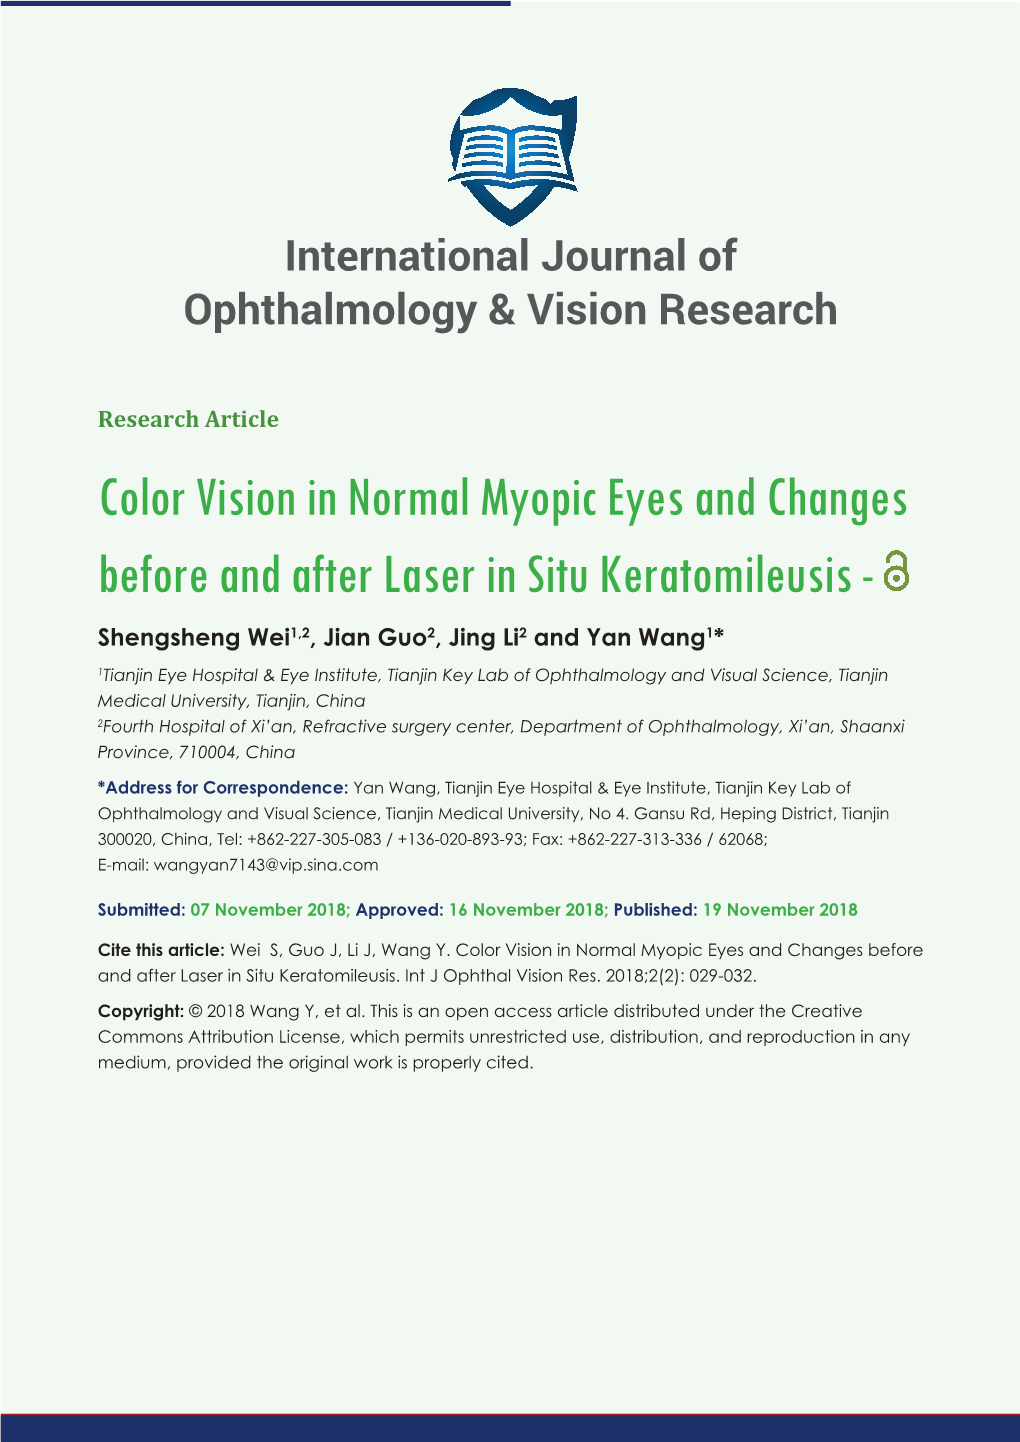 Color Vision in Normal Myopic Eyes and Changes Before and After Laser in Situ Keratomileusis